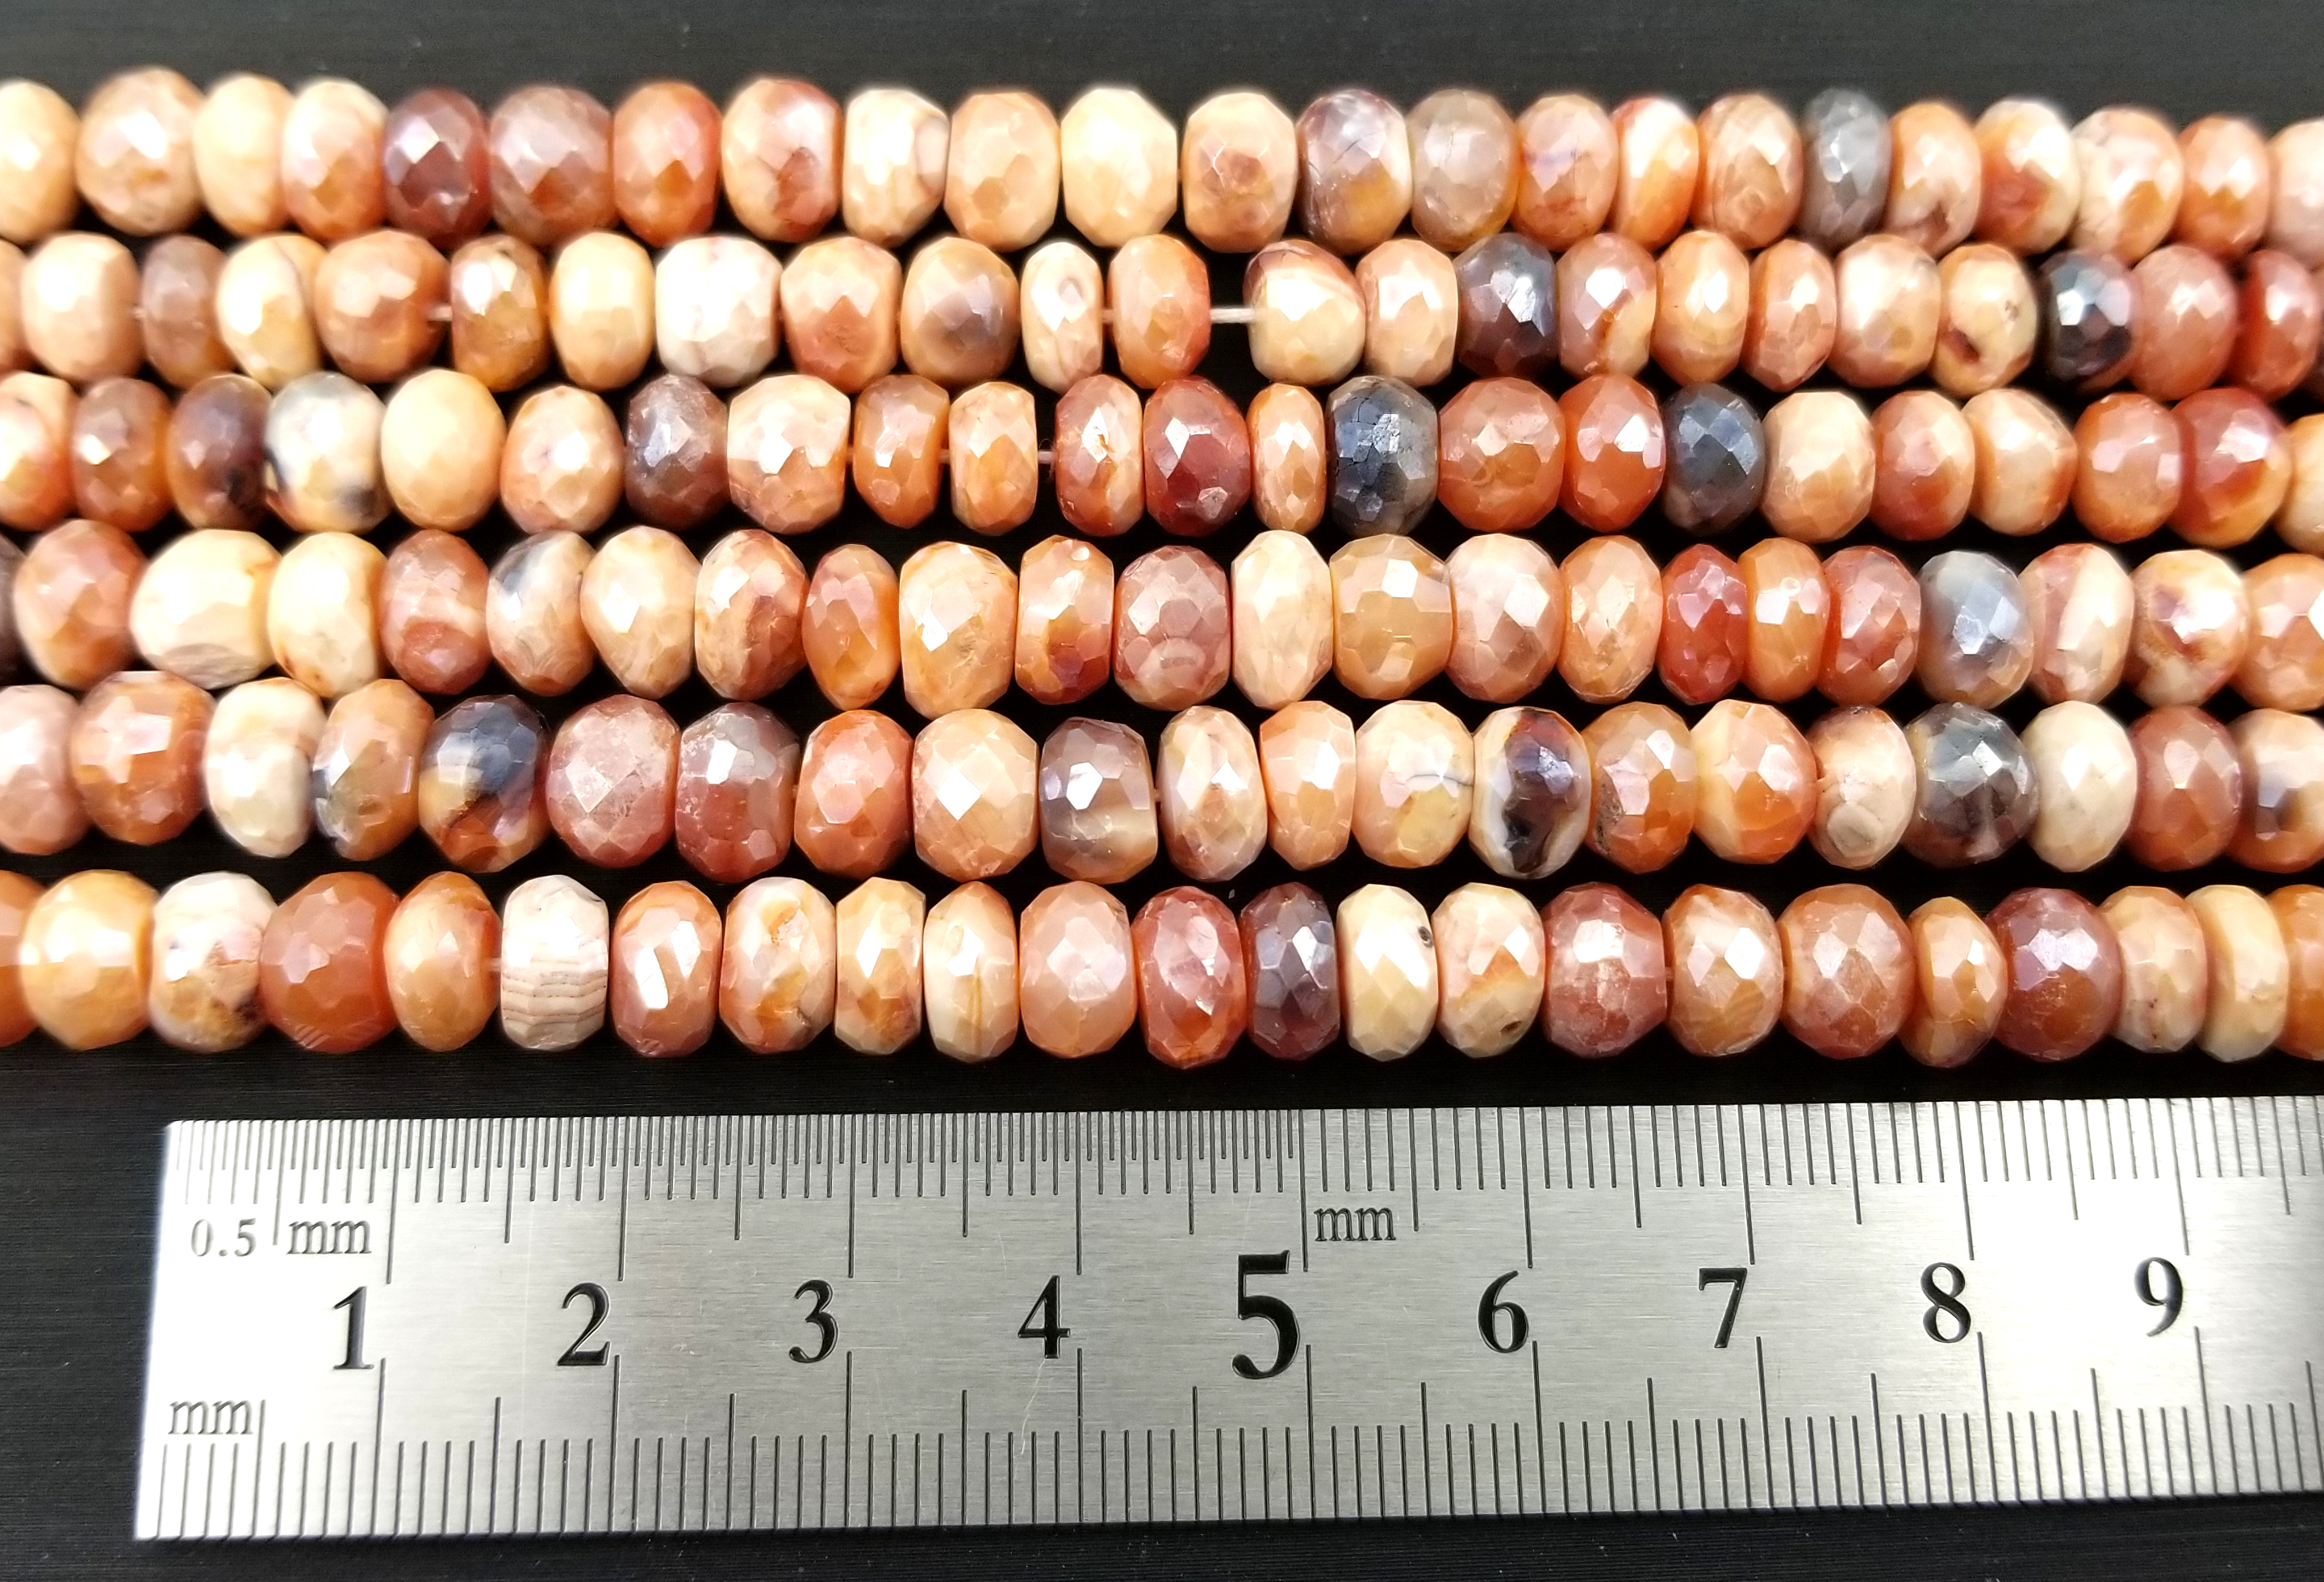 Mexican Fire Opal Faceted 2mm Round Beads Grade A Natural Gemstone Faceted Round Loose Beads Stone Beads for Jewelry Making